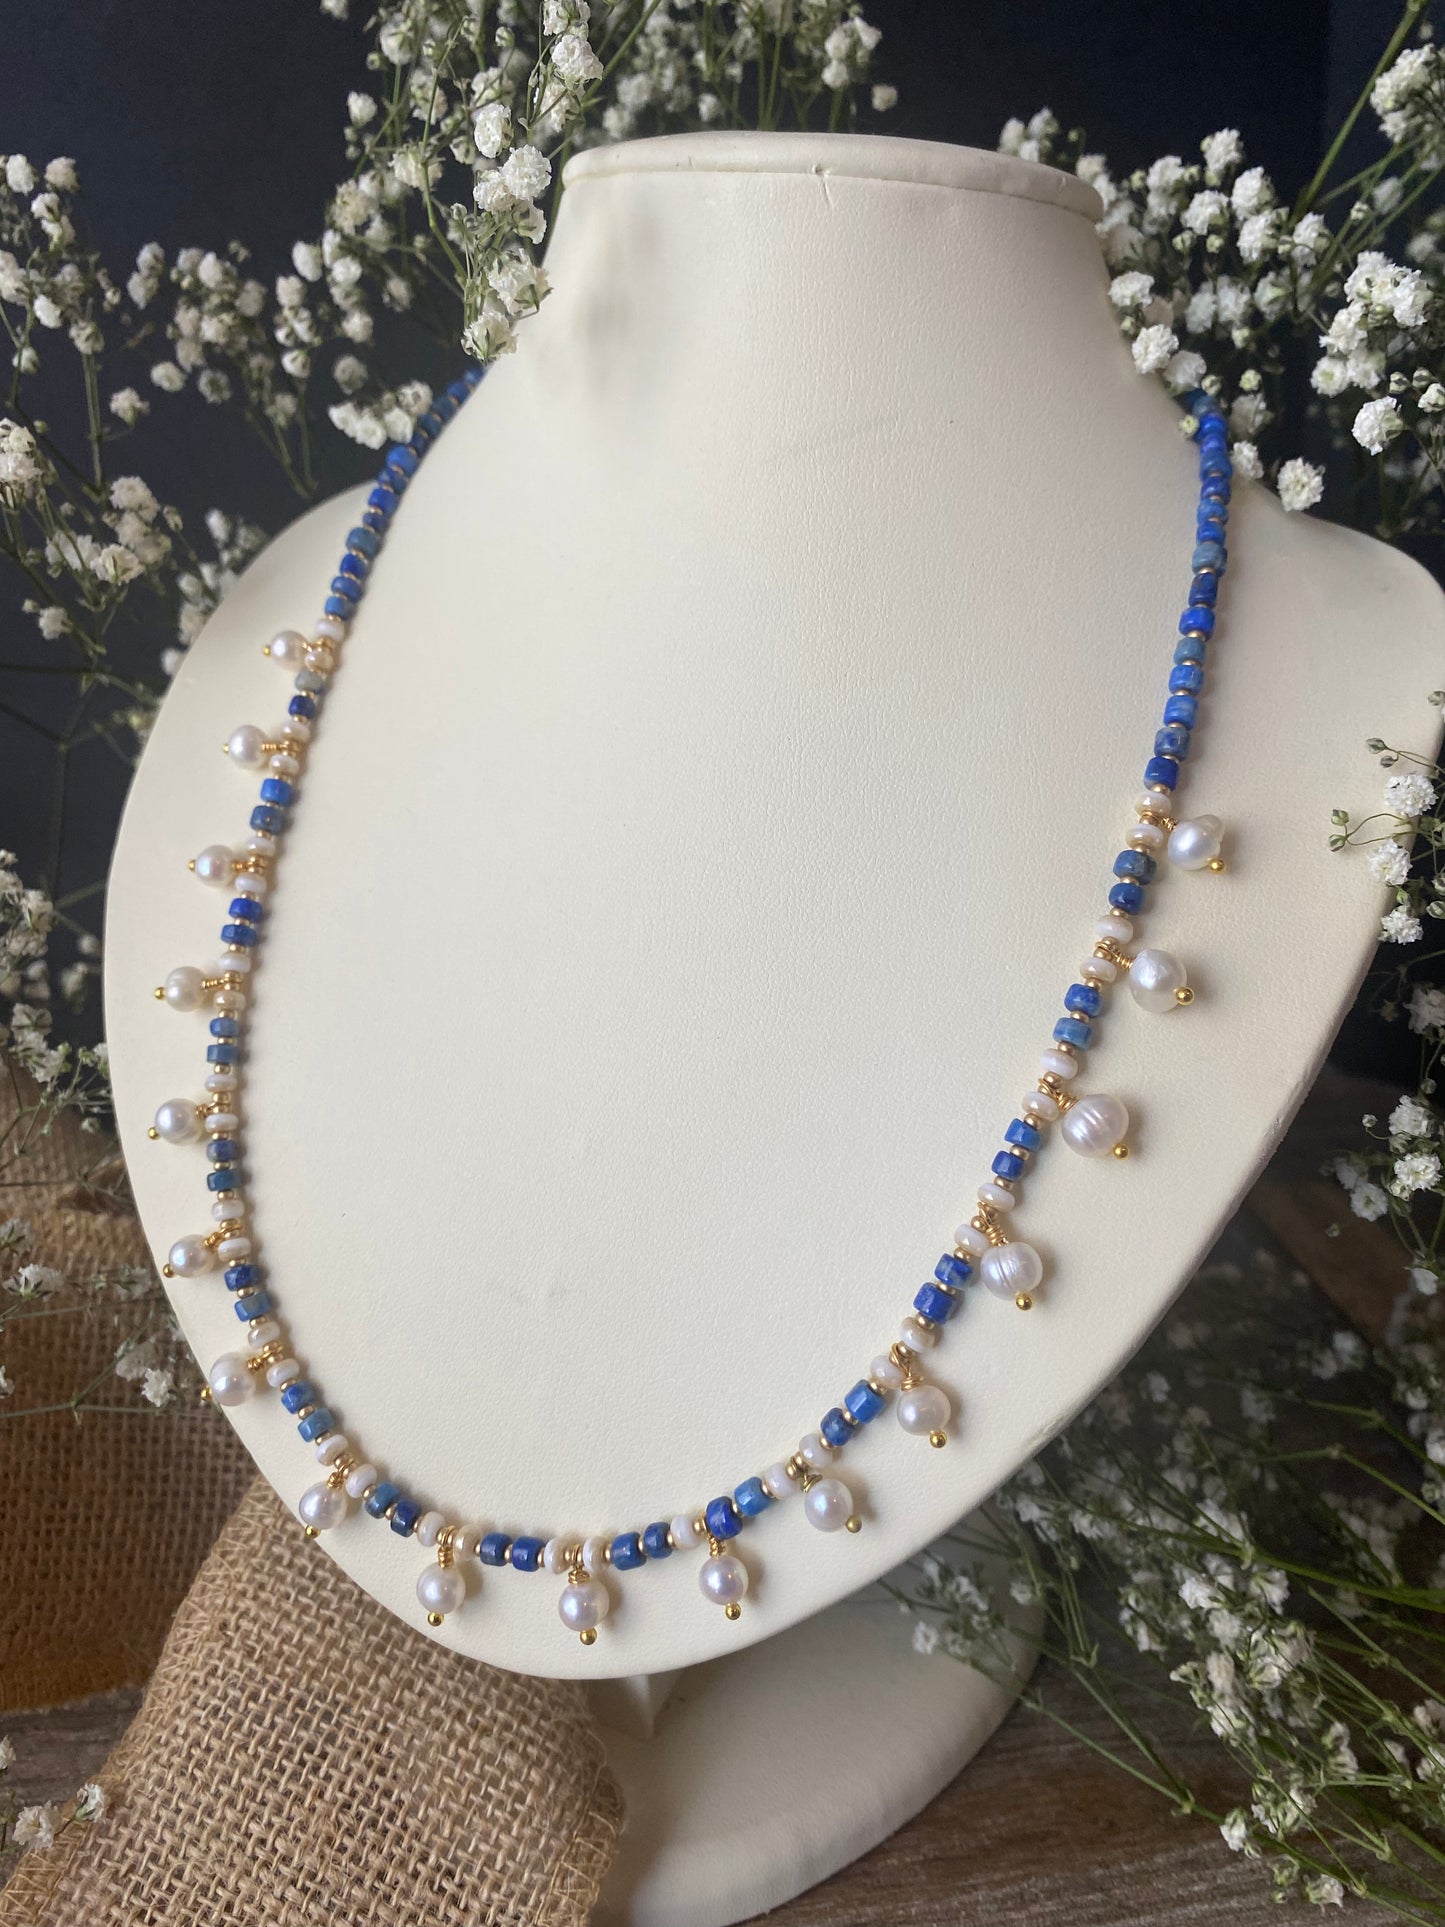 Lapis lazuli stone, freshwater pearls, gold 18k necklace, jewelry - Andria Bieber Designs 